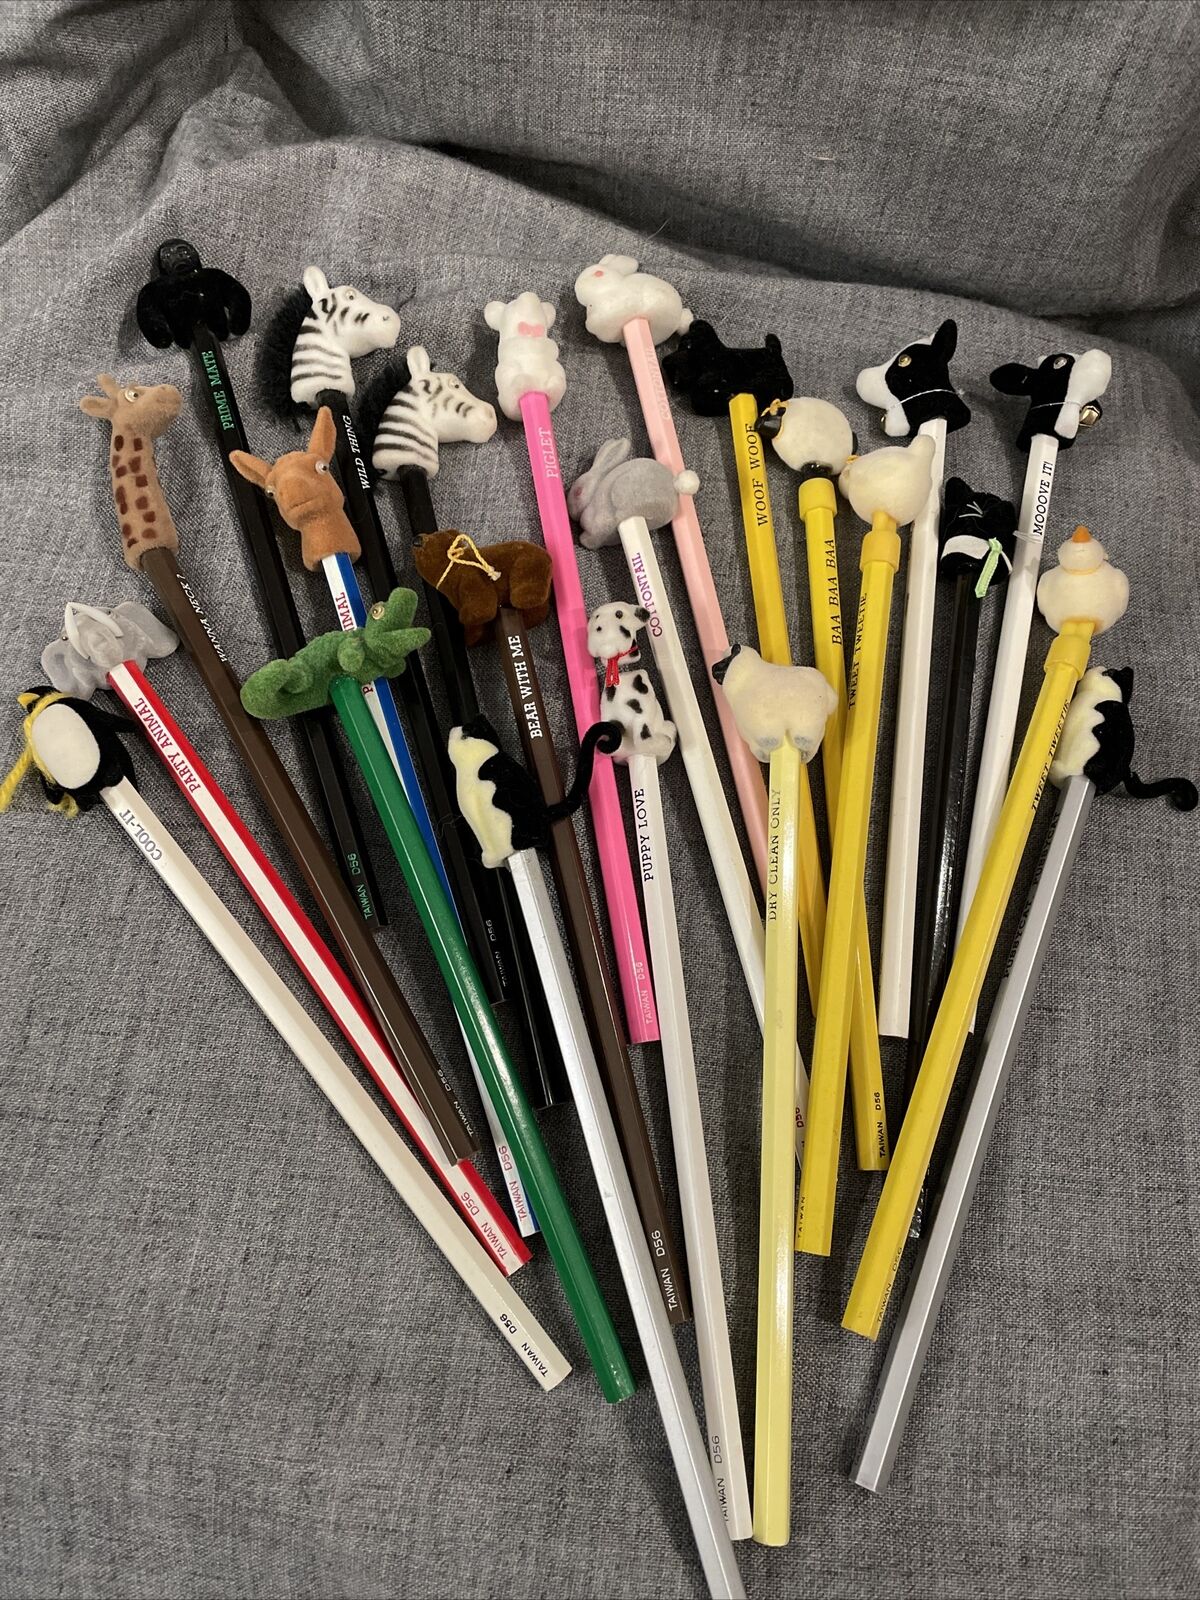 Lot Of 23 Vintage 1980’s Novelty Fuzzy Topper Unsharpened Pencils